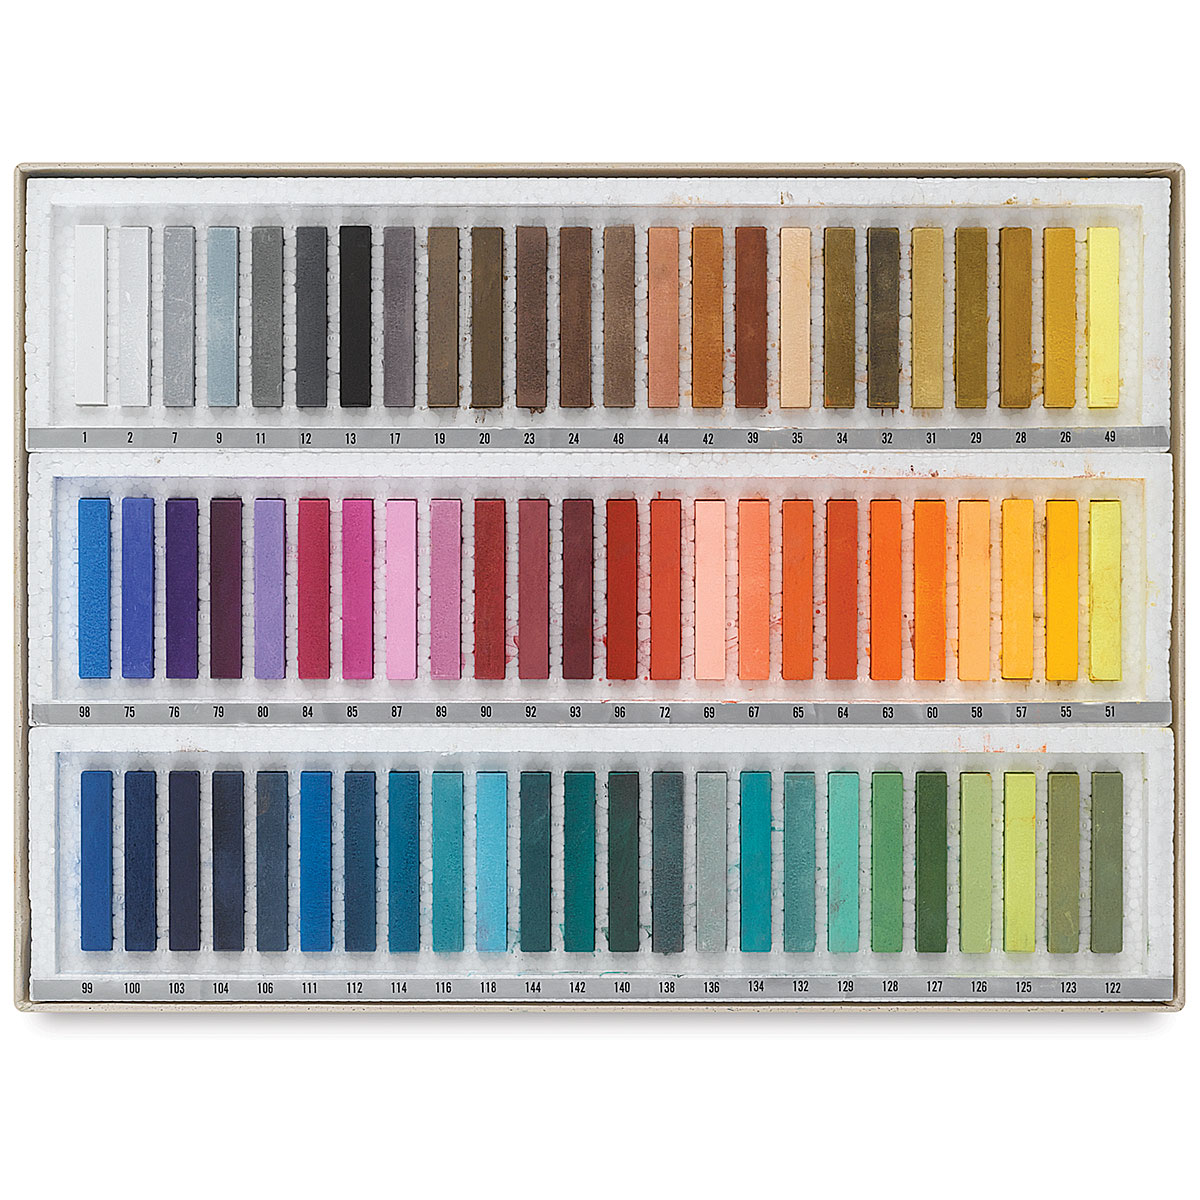 Paul Rubens Professional Soft Pastels, 40 Portrait Colors Chalk Pastels  Vibrant Smooth and High Adhesion for Painting, Drawing, Blending, Crafting